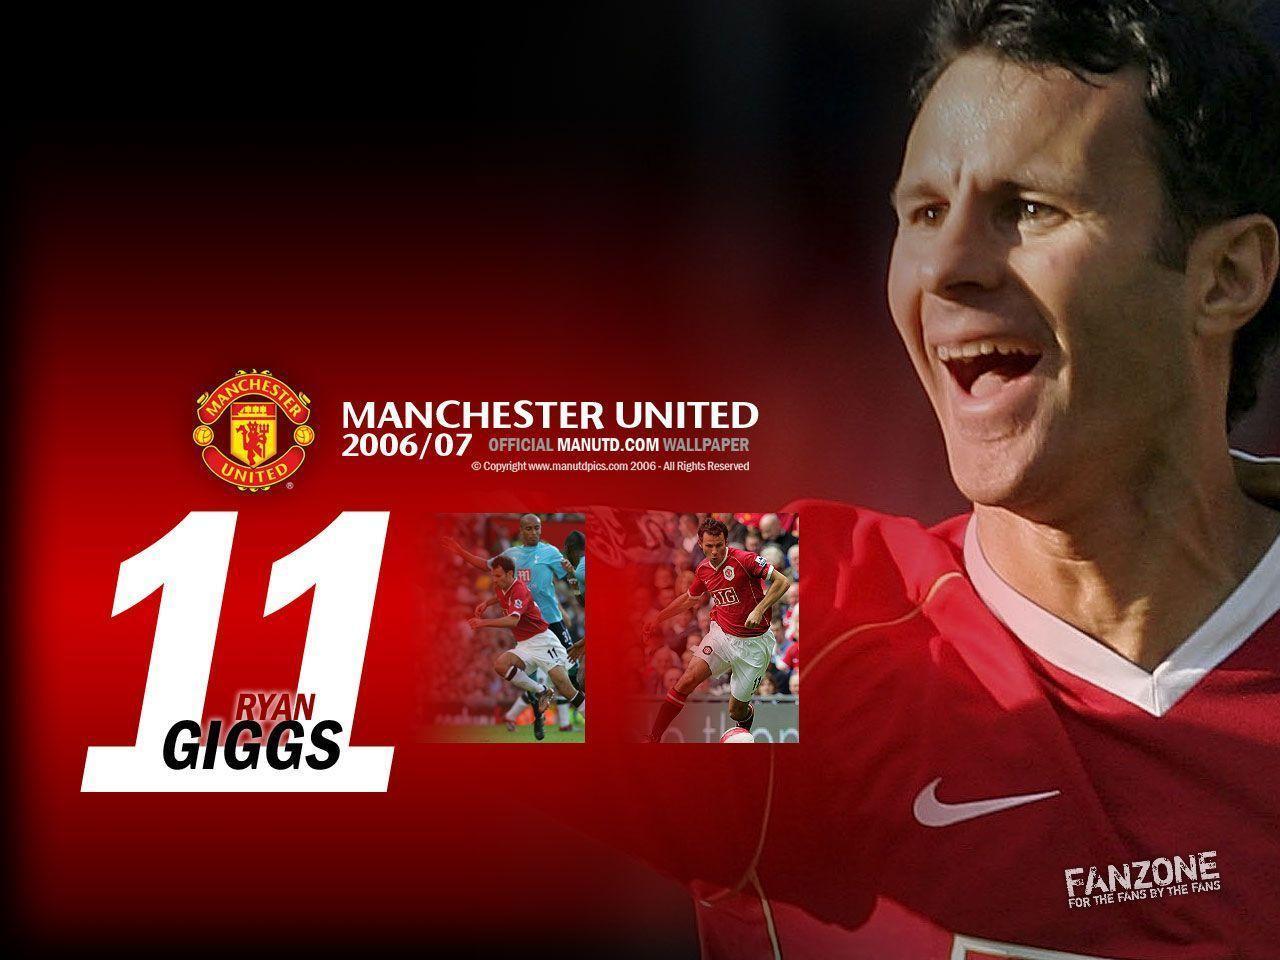 Ryan giggs united manchester footballer review